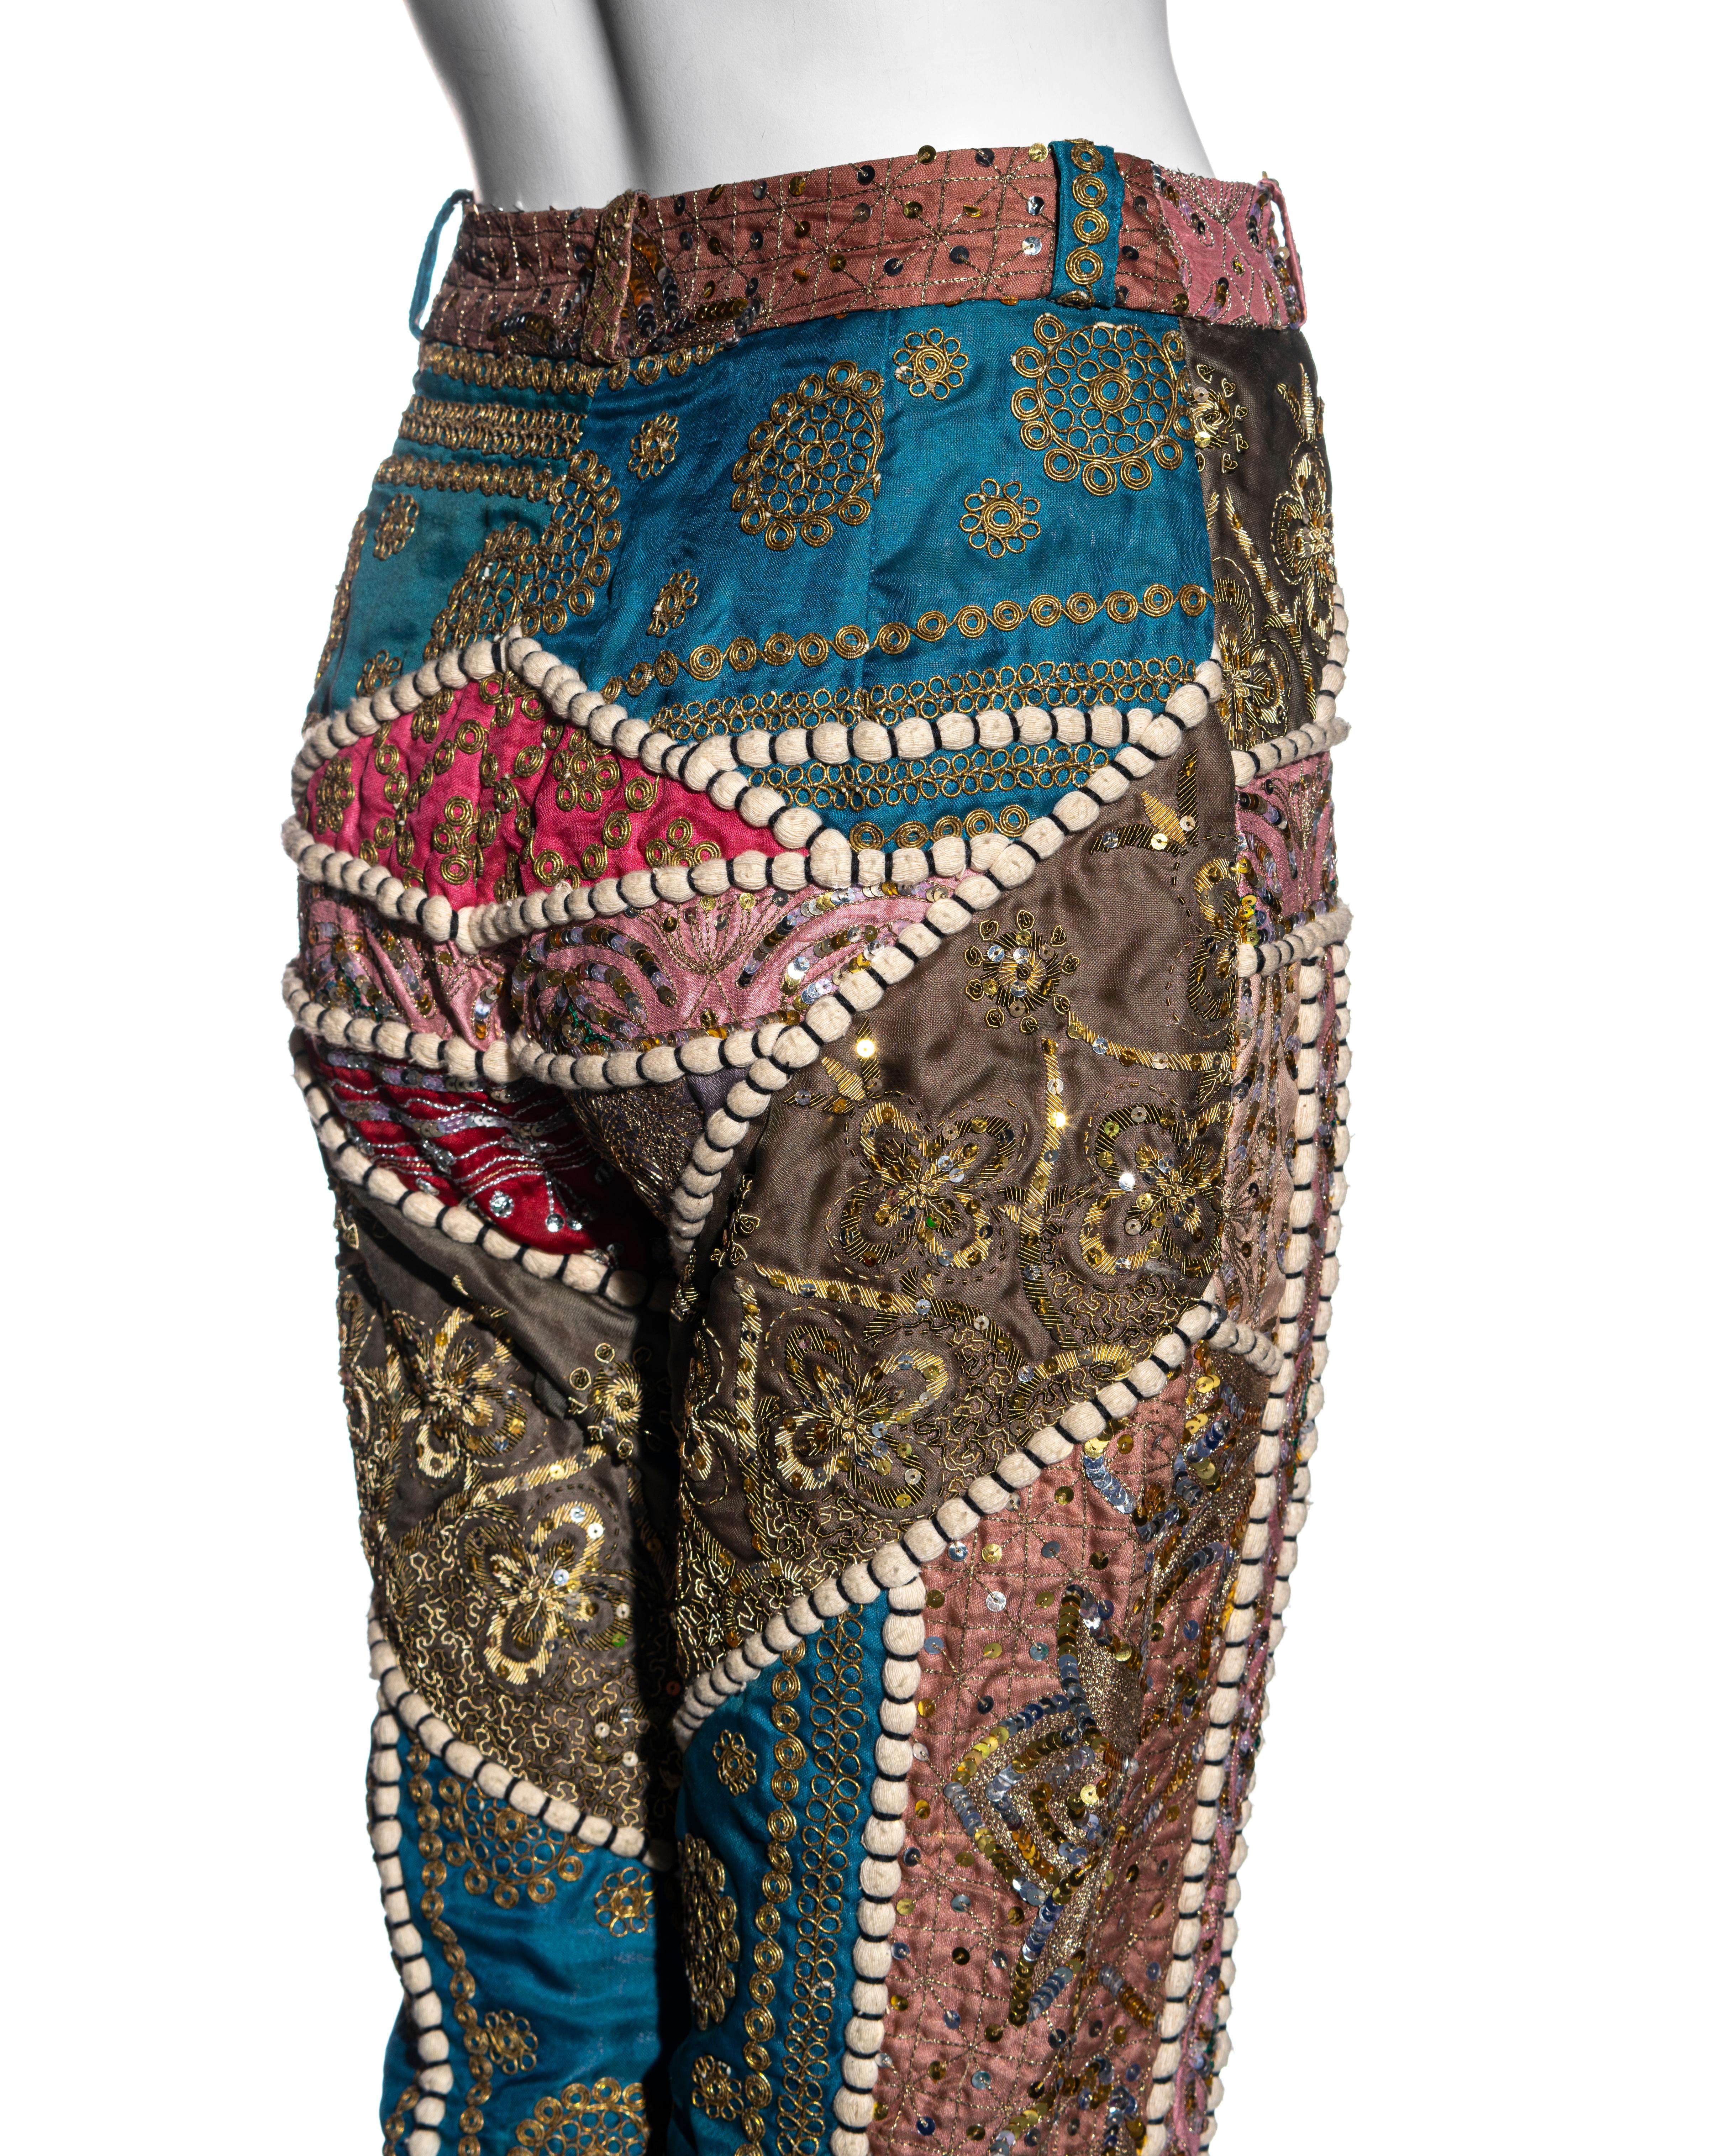 Gianfranco Ferre raw silk patchwork embroidered pants, ss 2002 For Sale 6